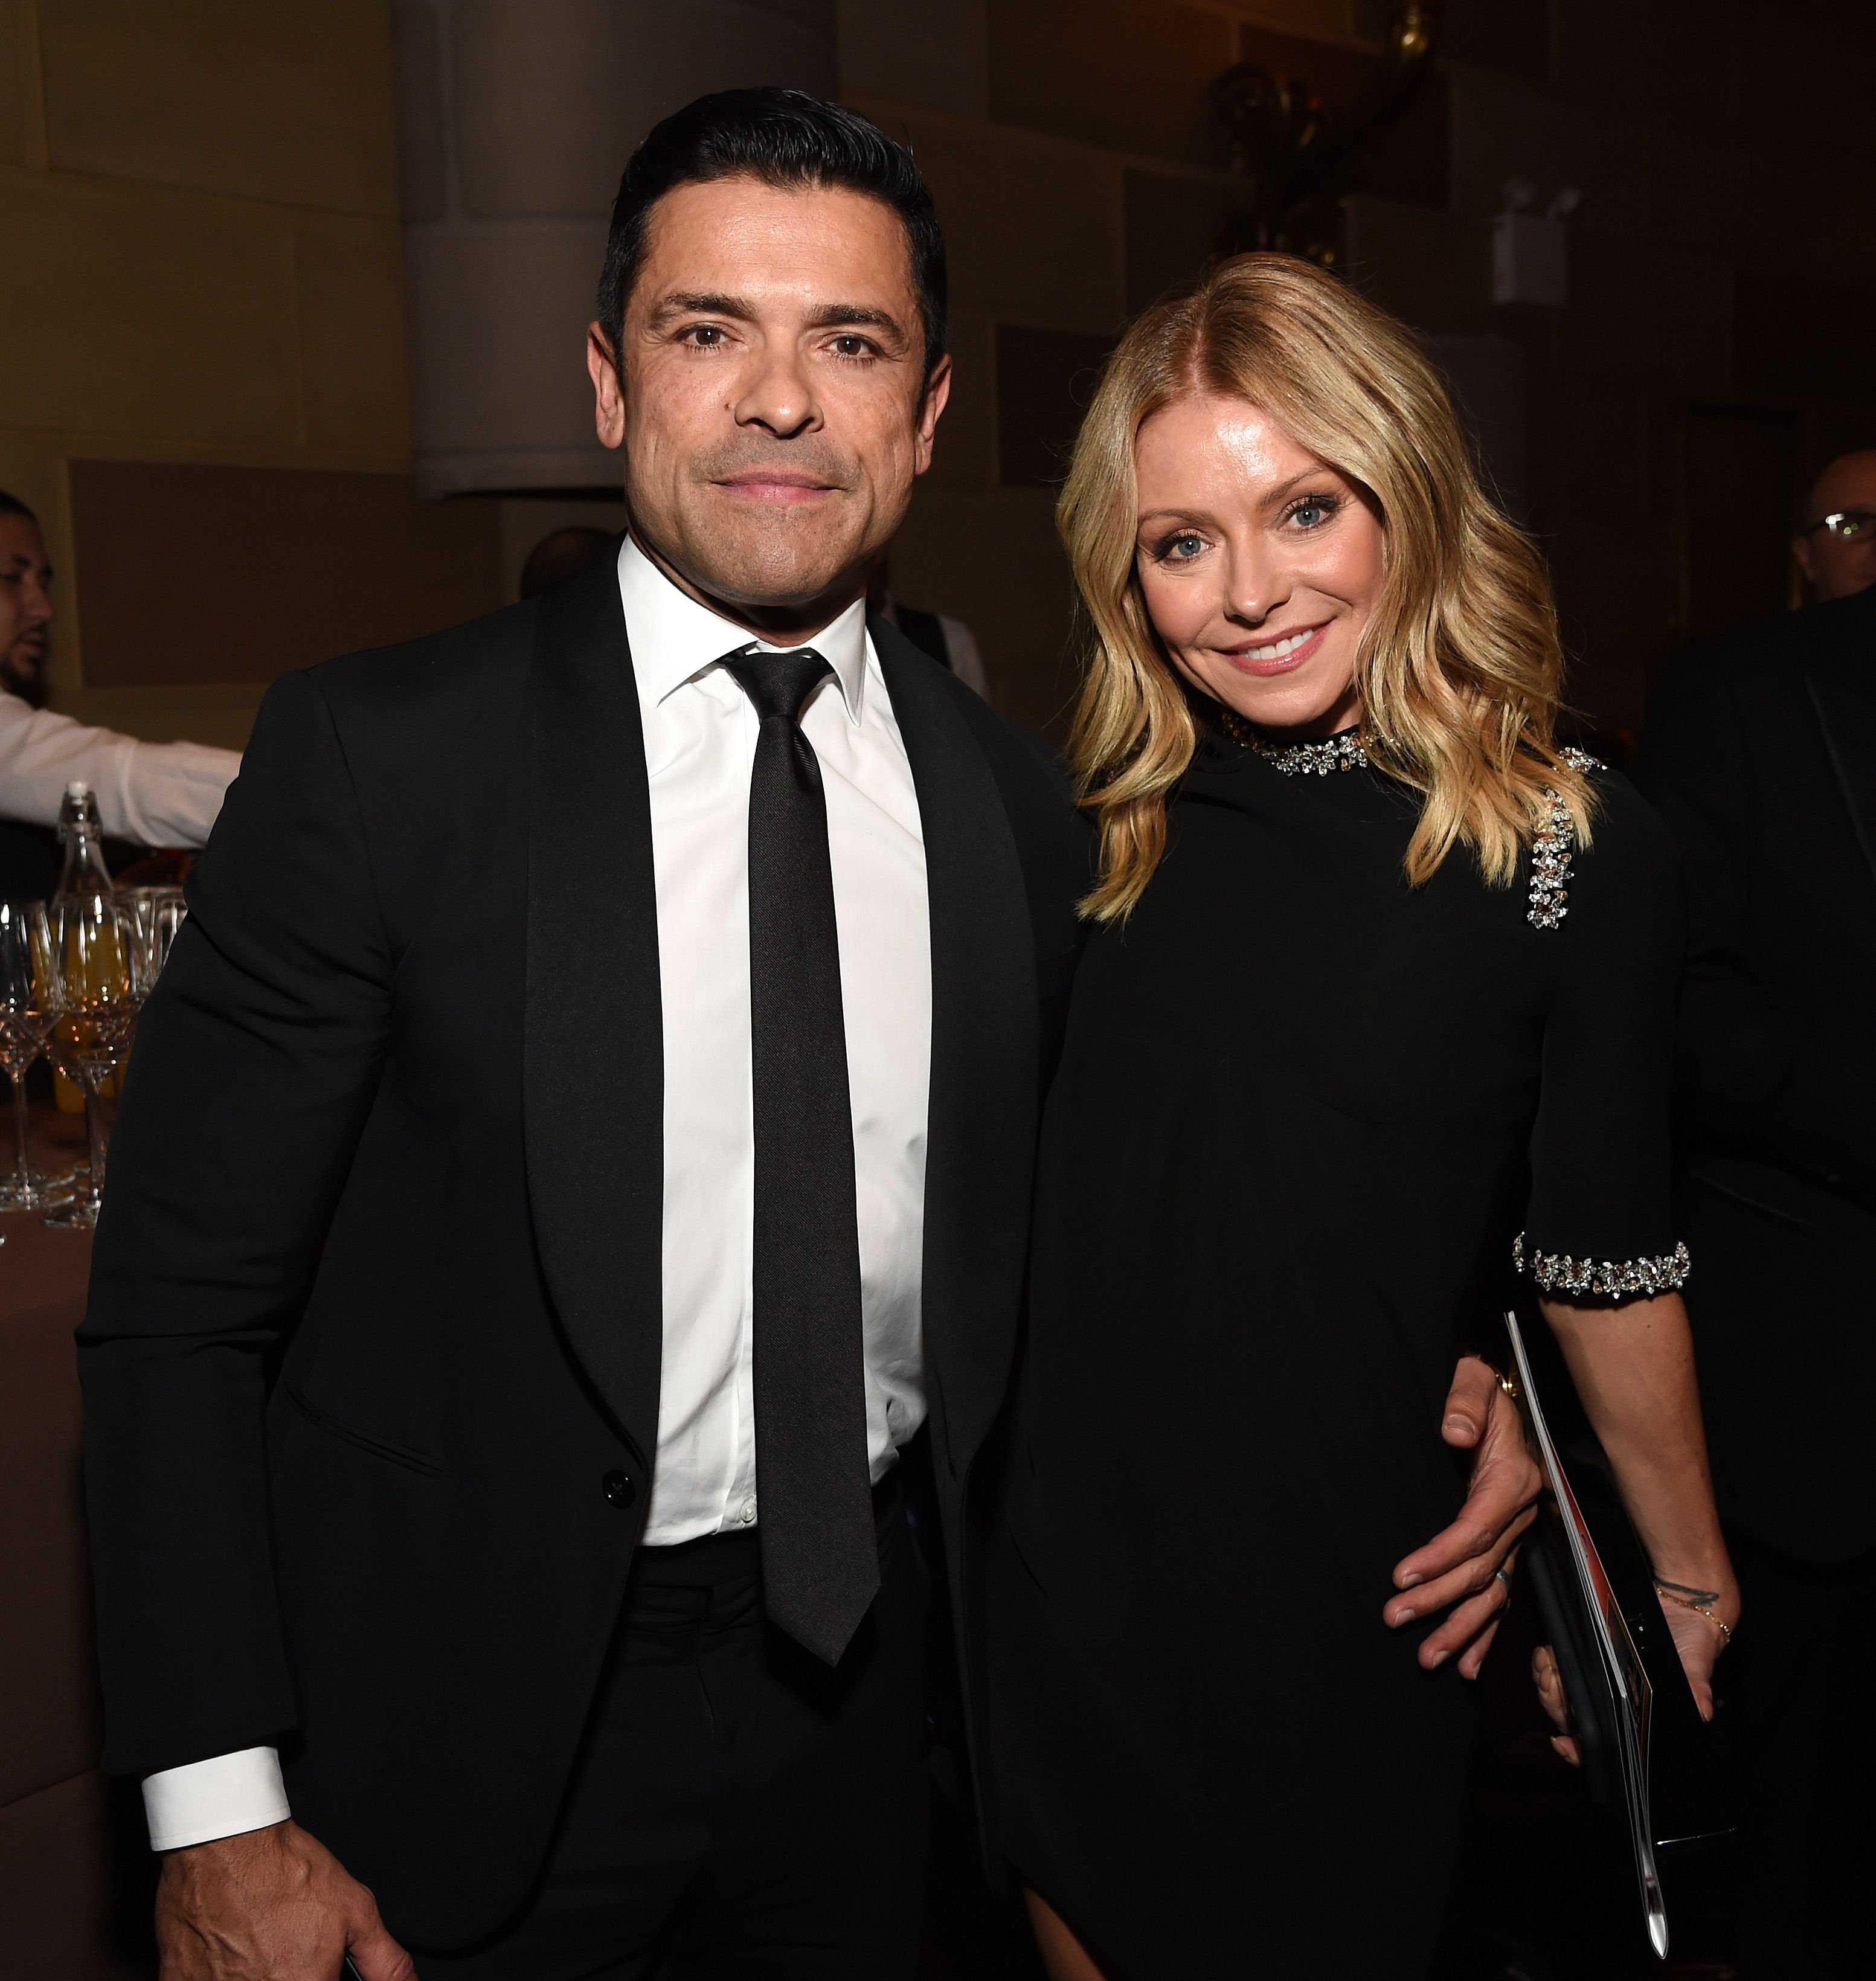 Mark Consuelos and Kelly Ripa pose during the Radio Hall of Fame Class of 2019 Induction Ceremony at Gotham Hall on November 08, 2019 in New York City. | Source: Getty Images